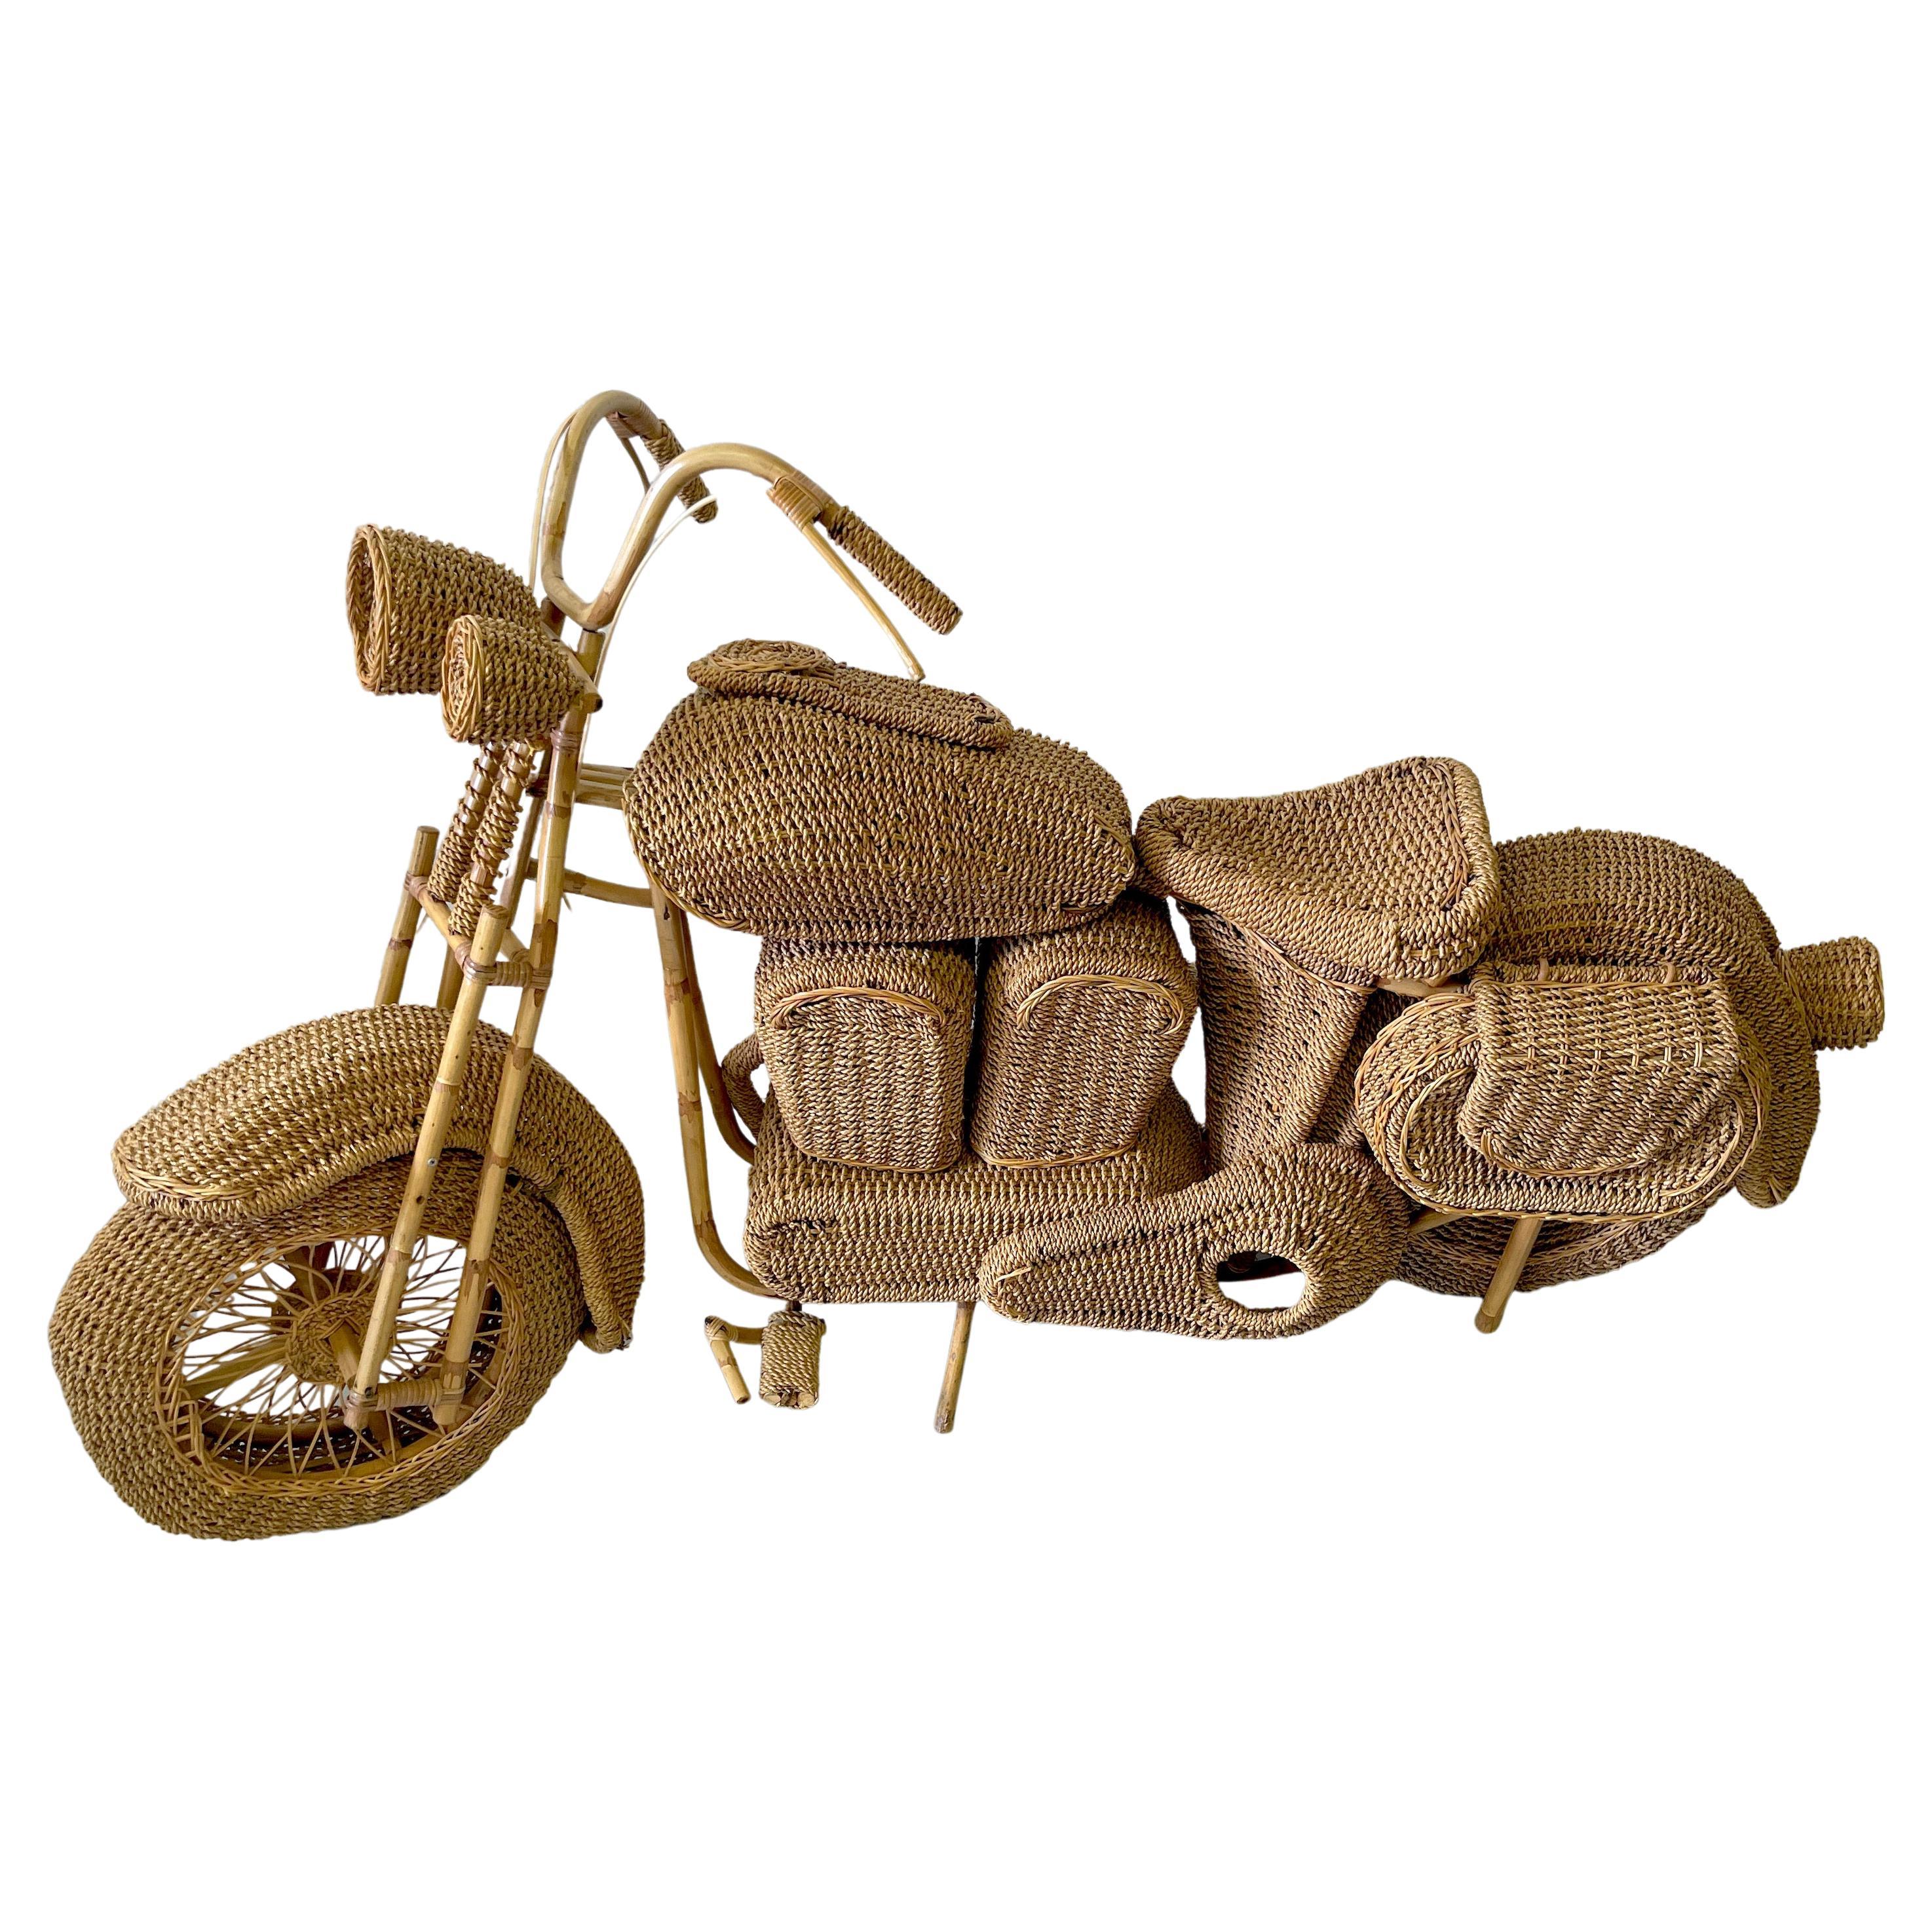 Life Size Harley Davidson Rattan Model of a Motorcycle, Attributed to Tom Dixon For Sale